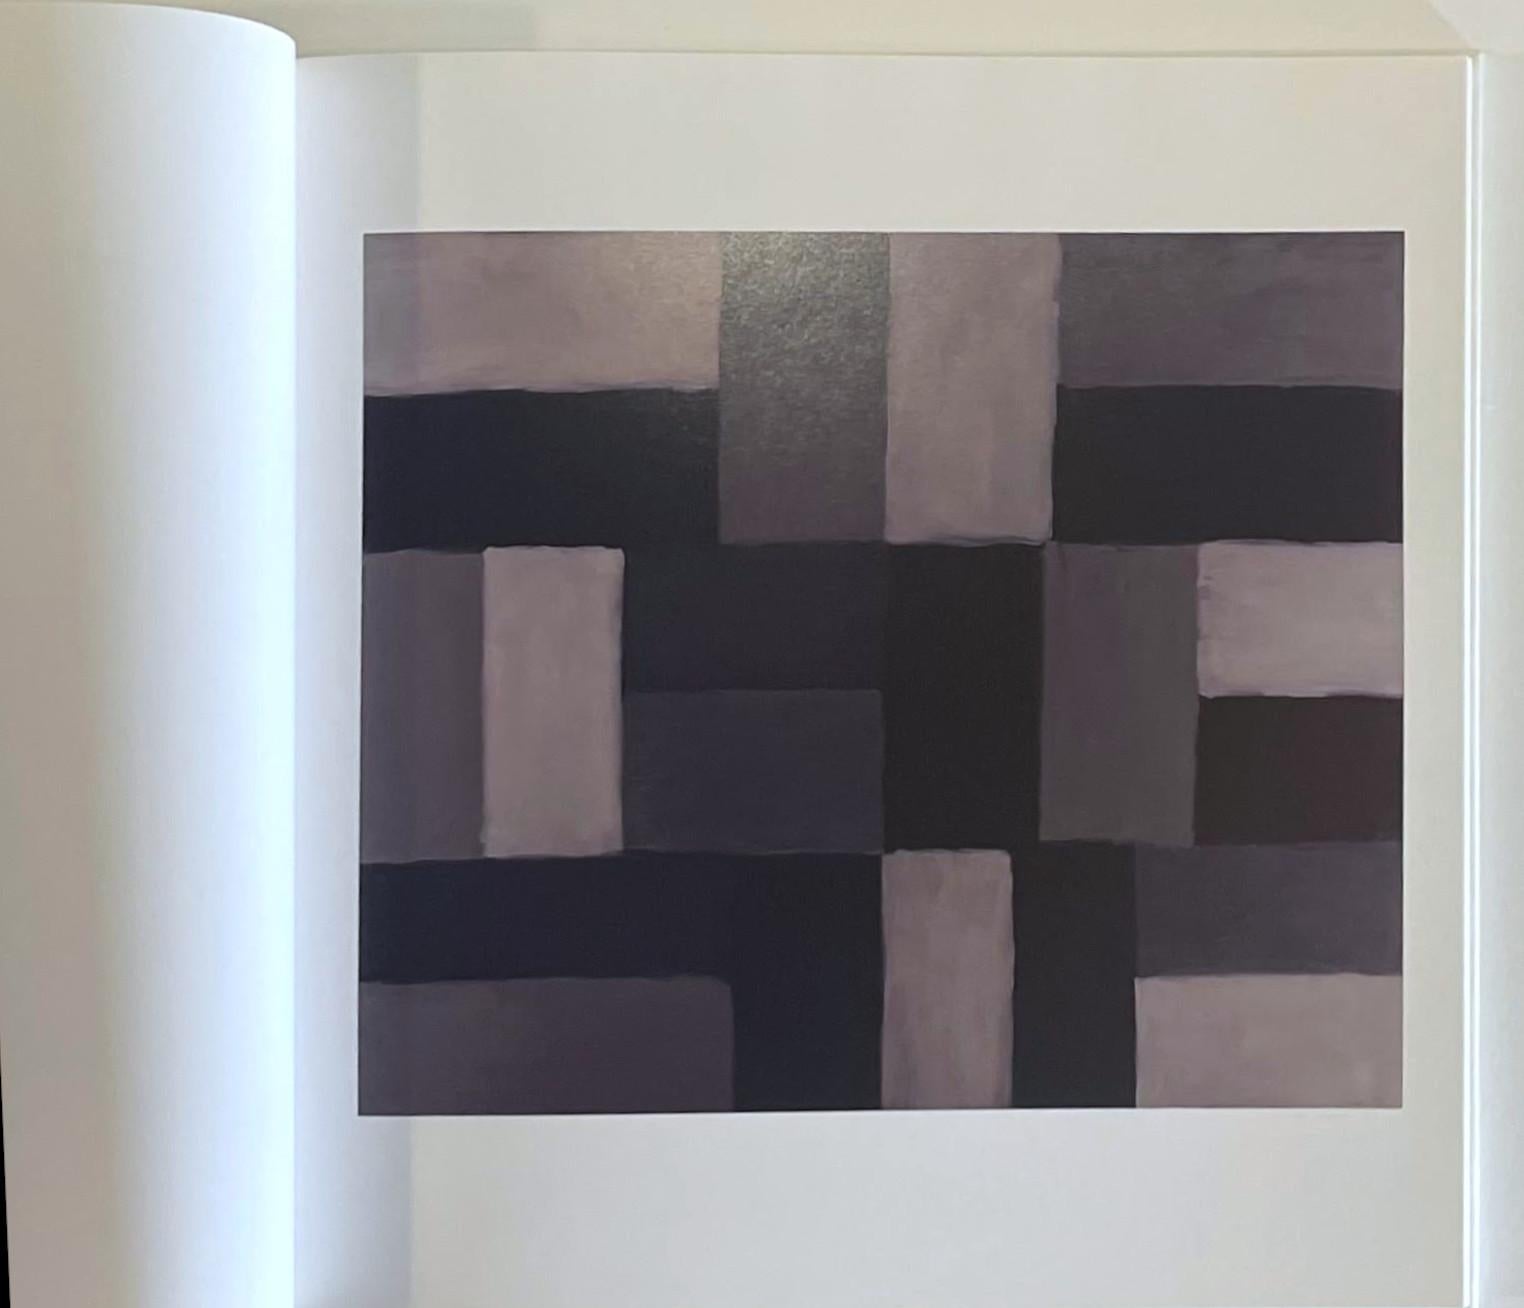 Different Places, Hardback monograph (Hand signed and inscribed by Sean Scully) For Sale 11